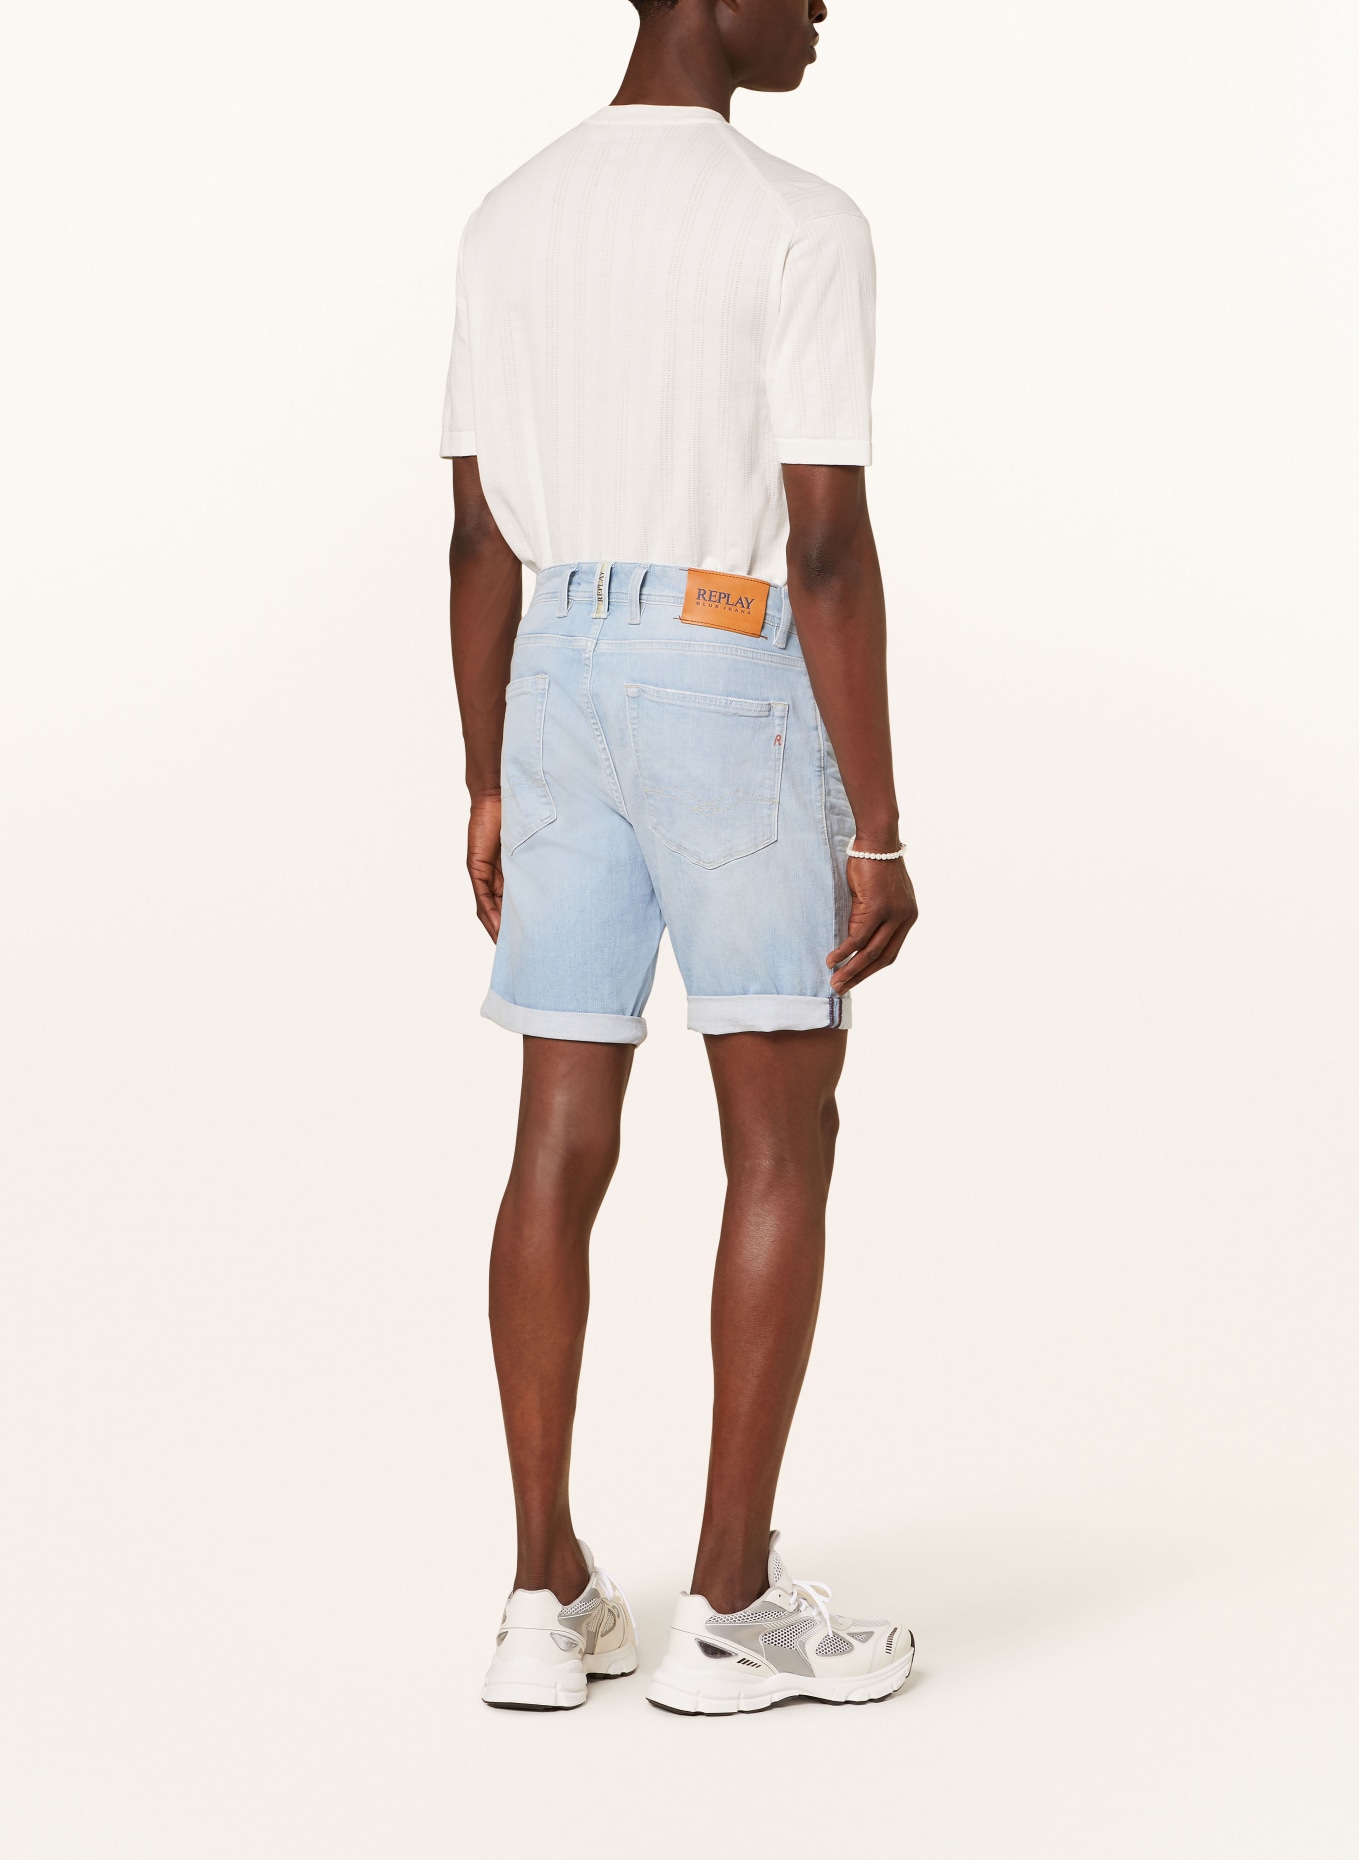 REPLAY Jeansshorts 573 Tapered Fit, Farbe: 010 LIGHT BLUE (Bild 3)